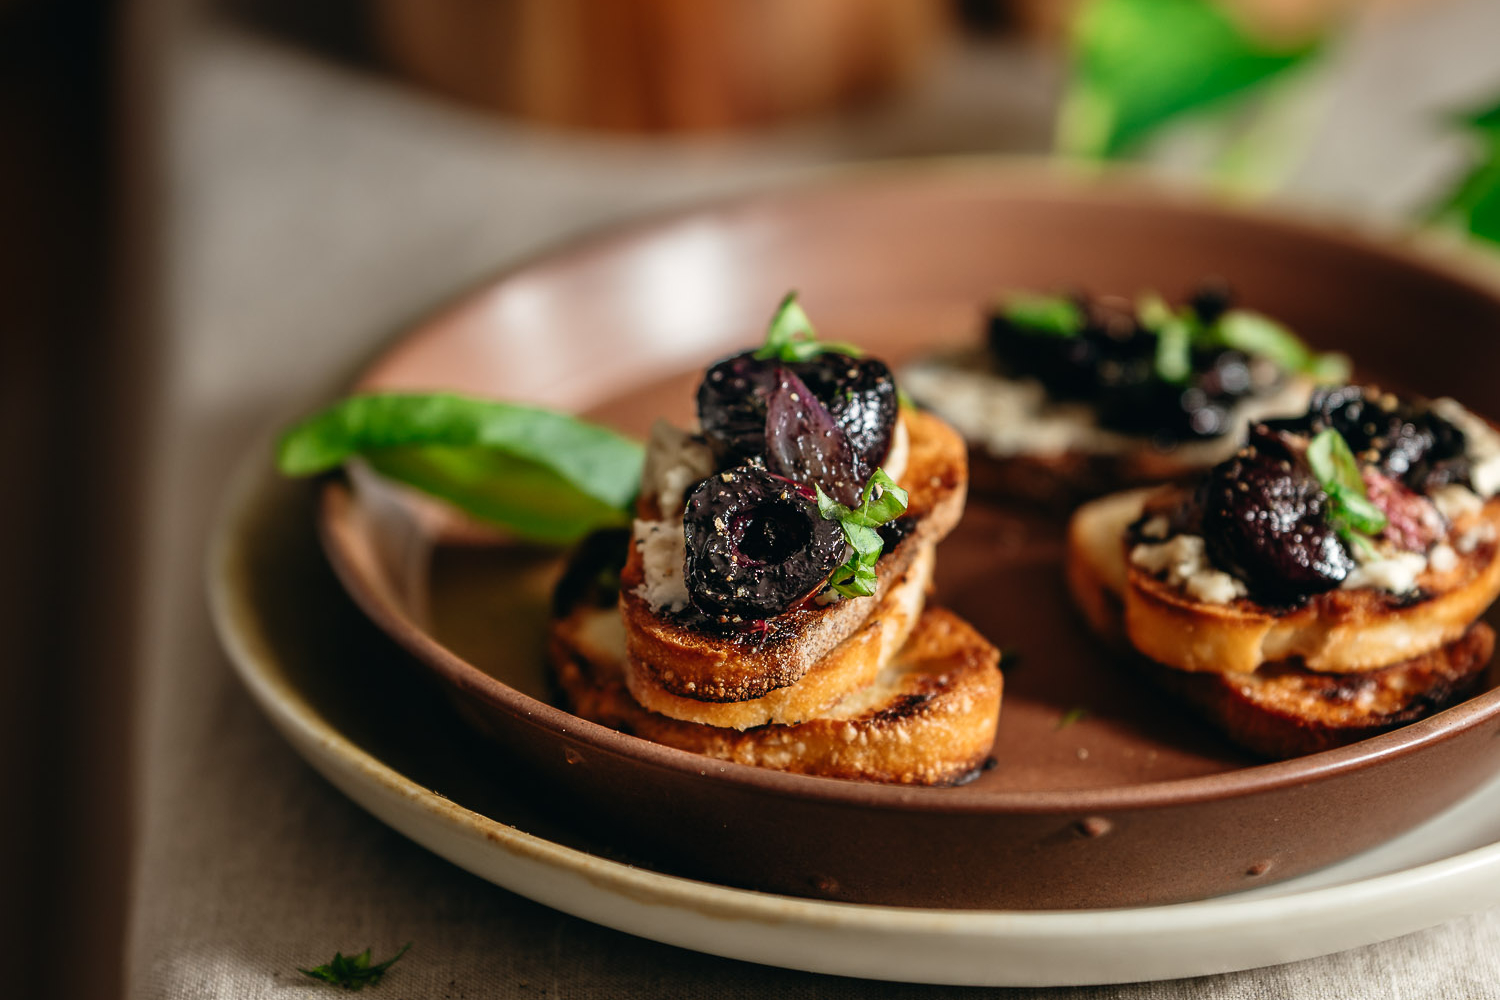 Grilled baguette topped with vegan cheese, roasted cherries, basil, and pepper